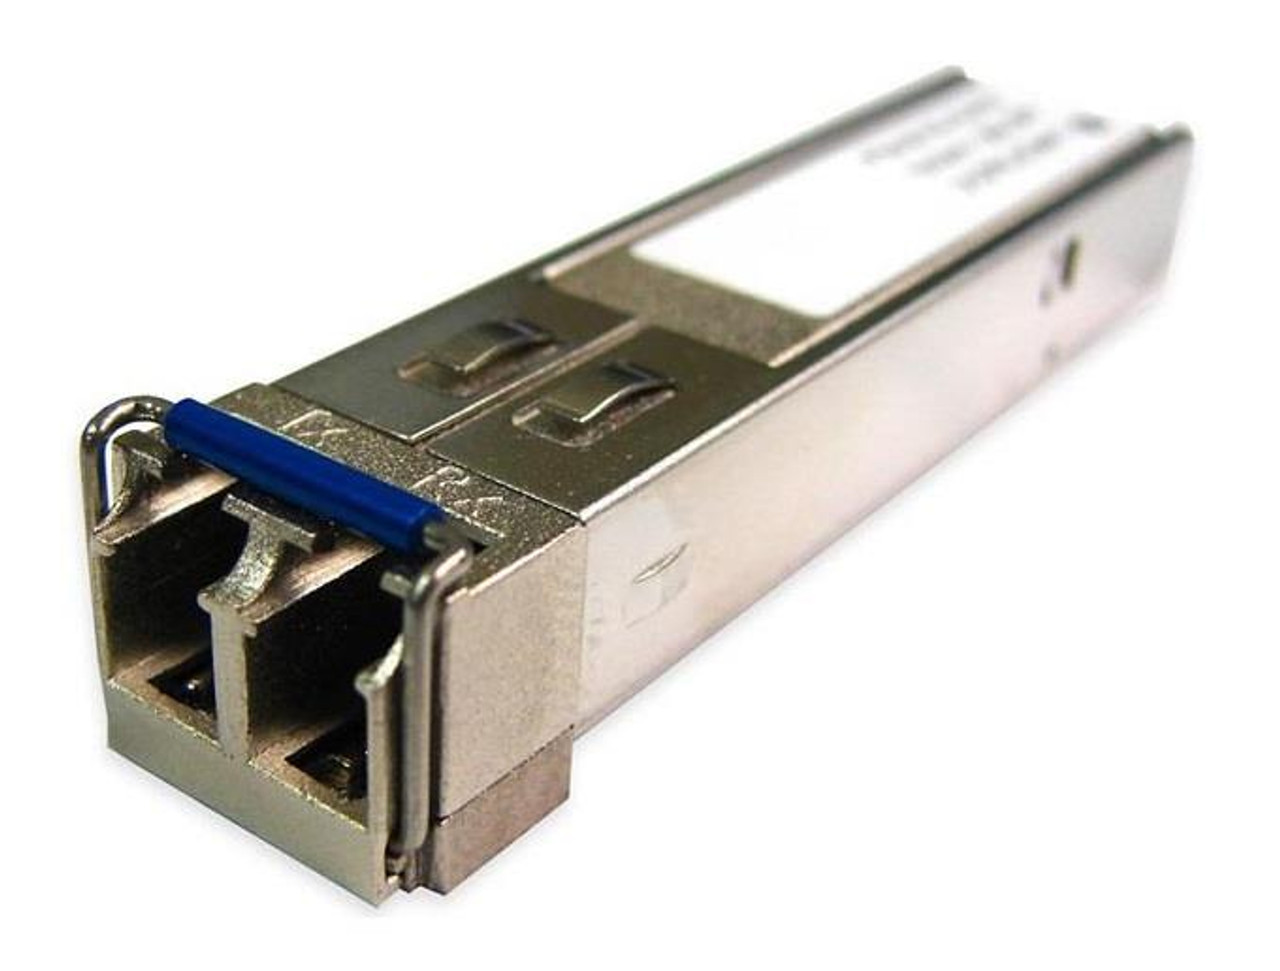 100-01670-C-ACC Accortec 1.25Gbps 1000Base-BX-U Single-mode Fiber 40km 1310nmTX/1490nmRX LC Connector SFP Transceiver Module for Calix Compatible